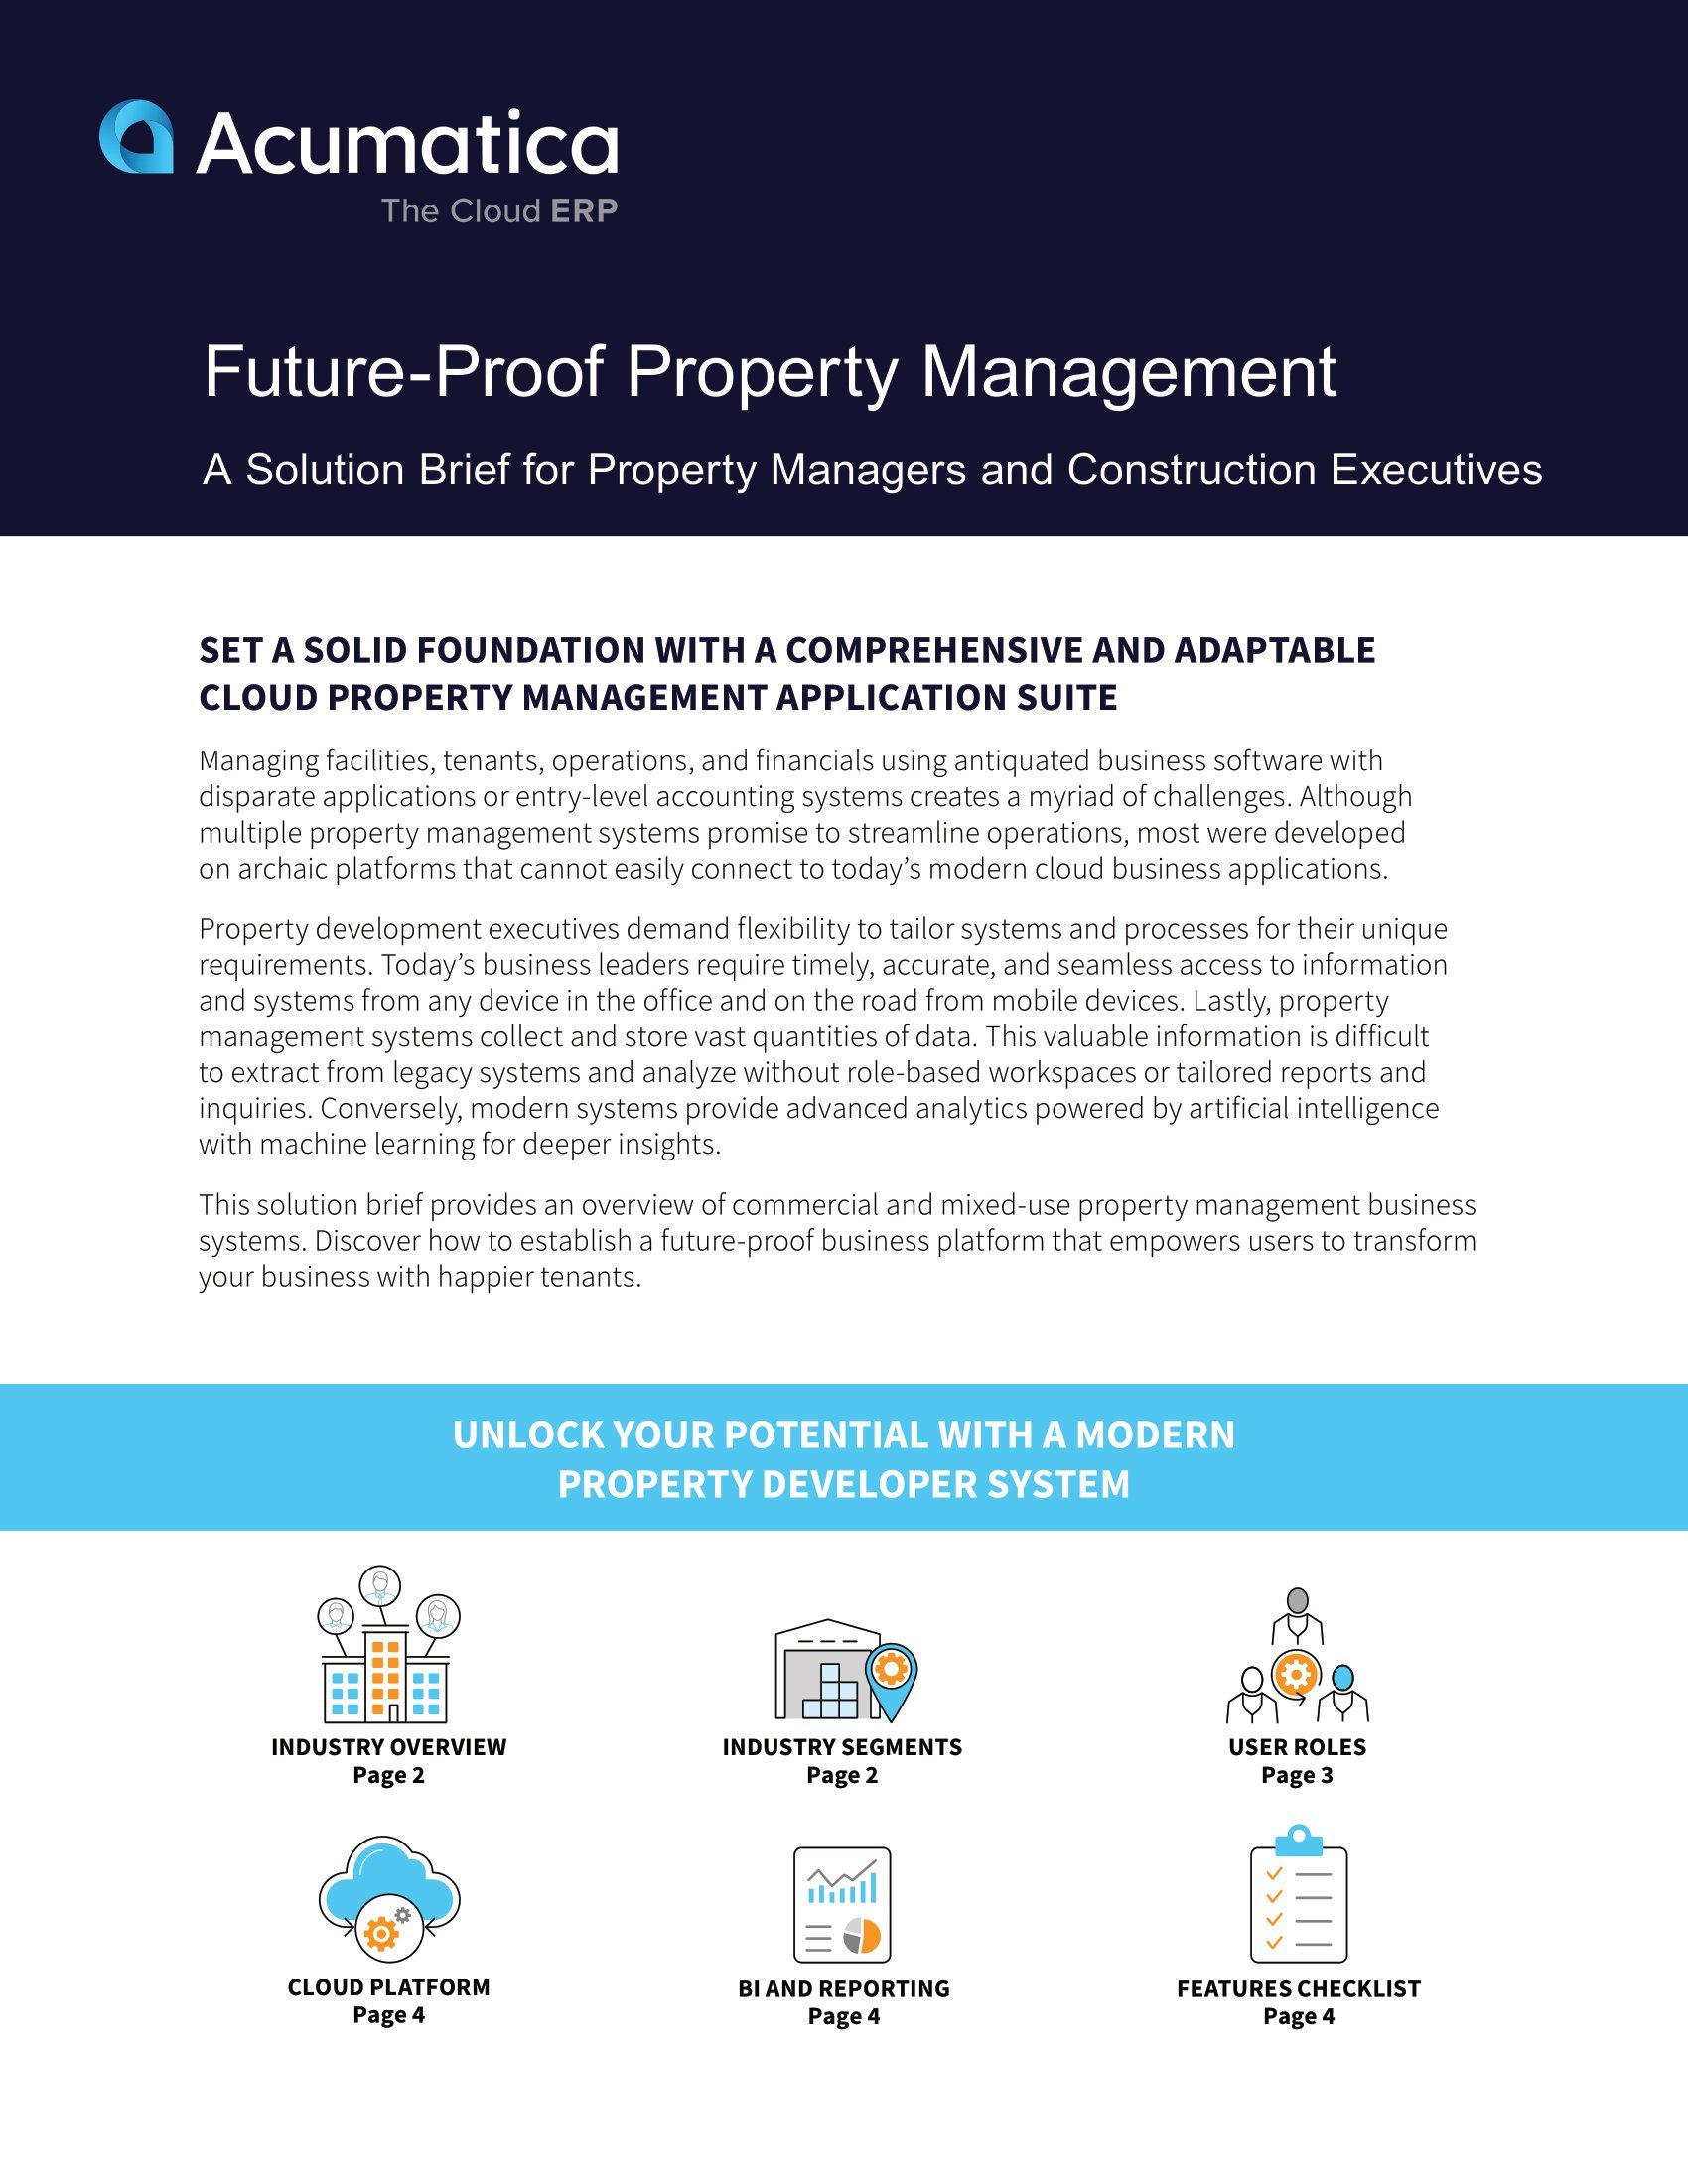 Improve Operations with Acumatica’s Specialized Property Management Software